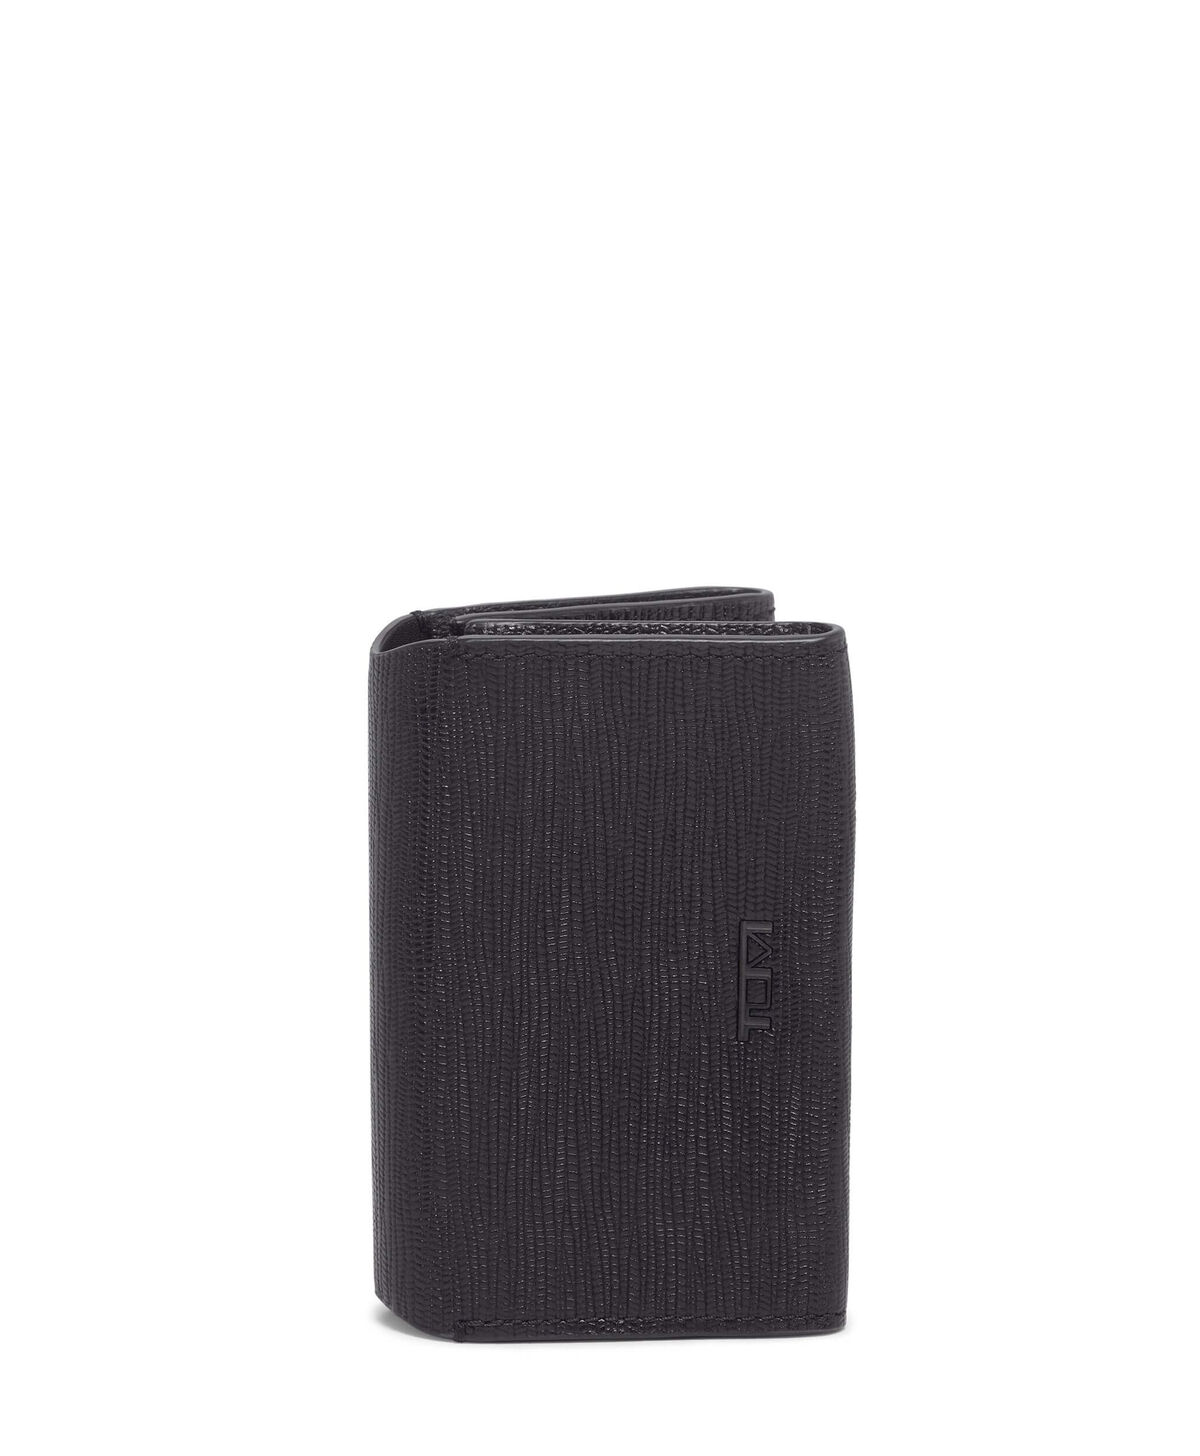 Tumi Nassau DOUBLE GUSSETED CARD CASE  Black Embossed